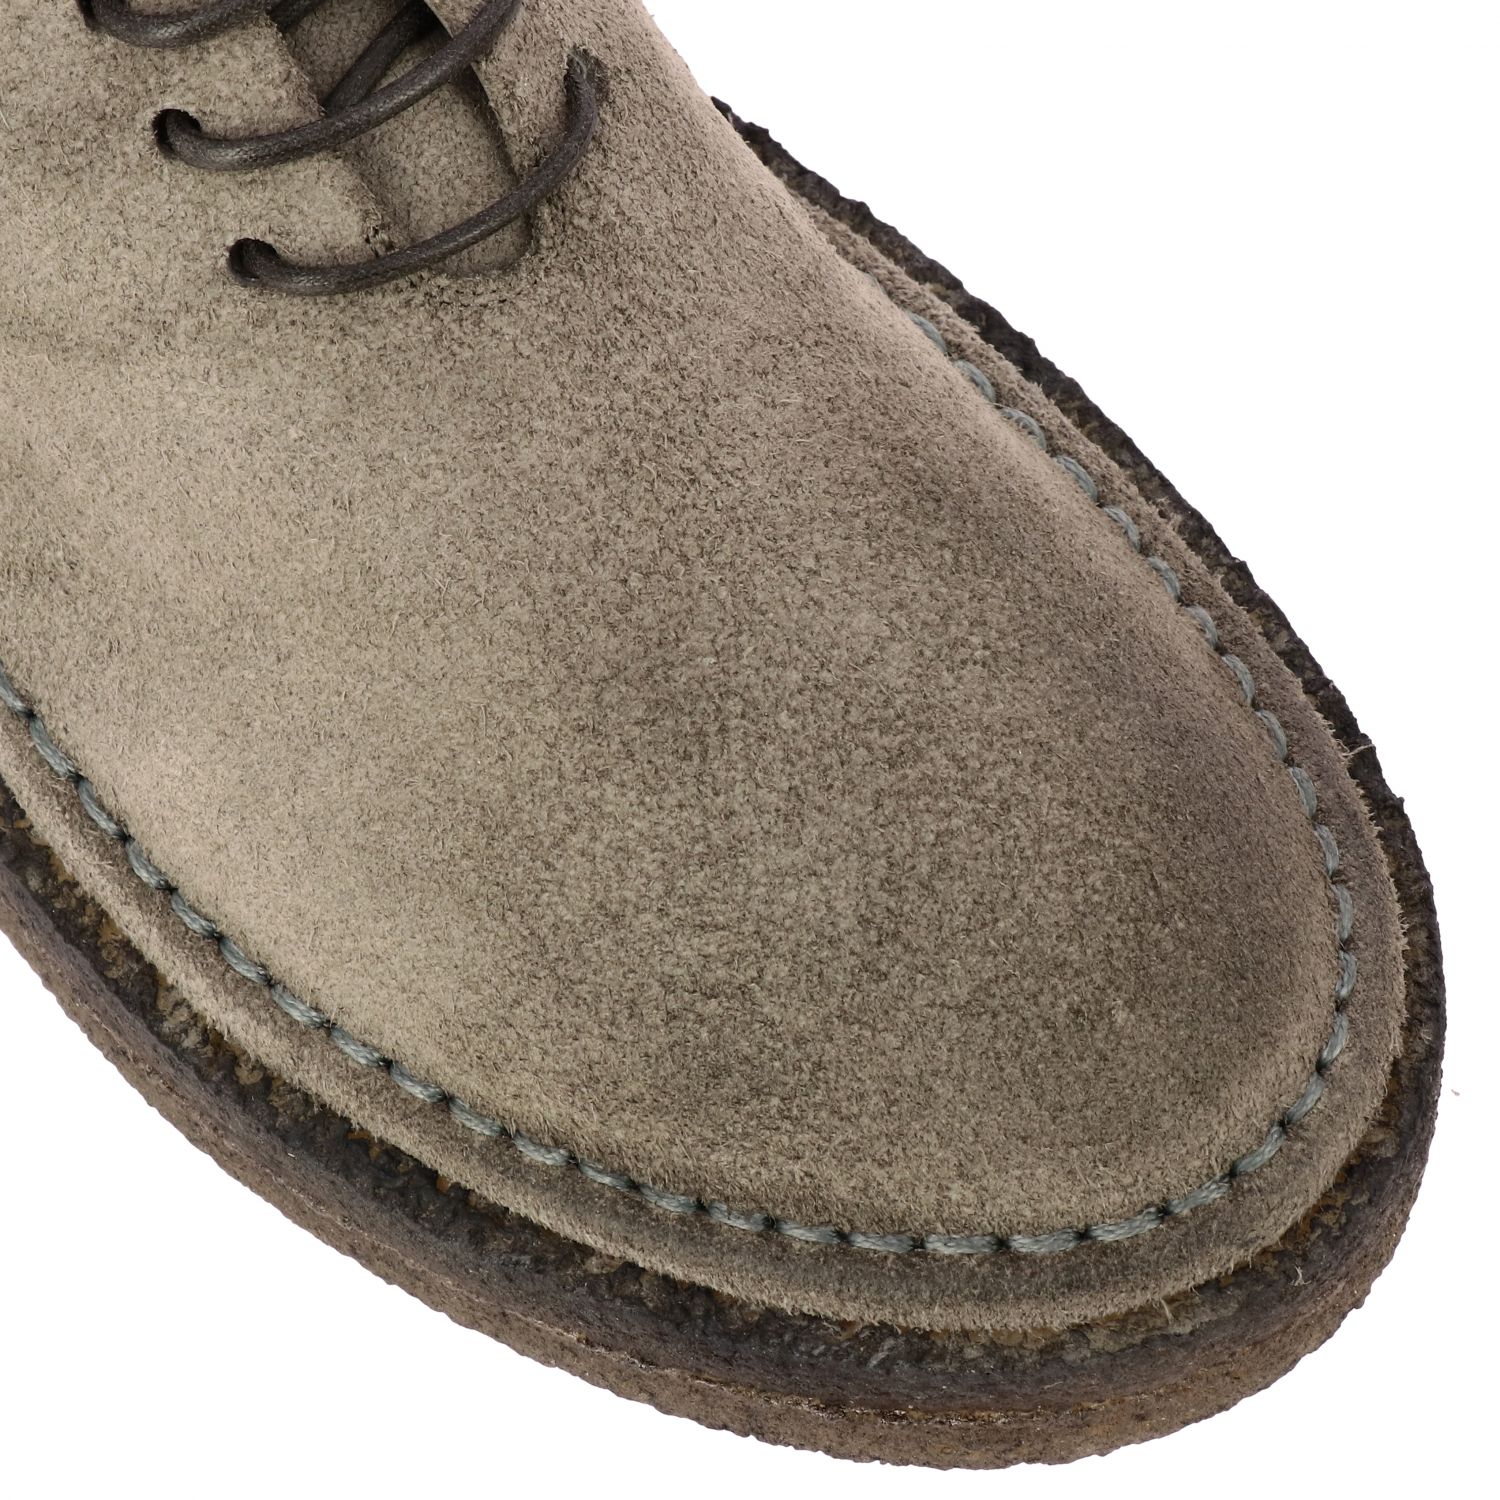 Sancrispa Marsell laced shoes in suede | Brogue Shoes Marsell Men Mud ...